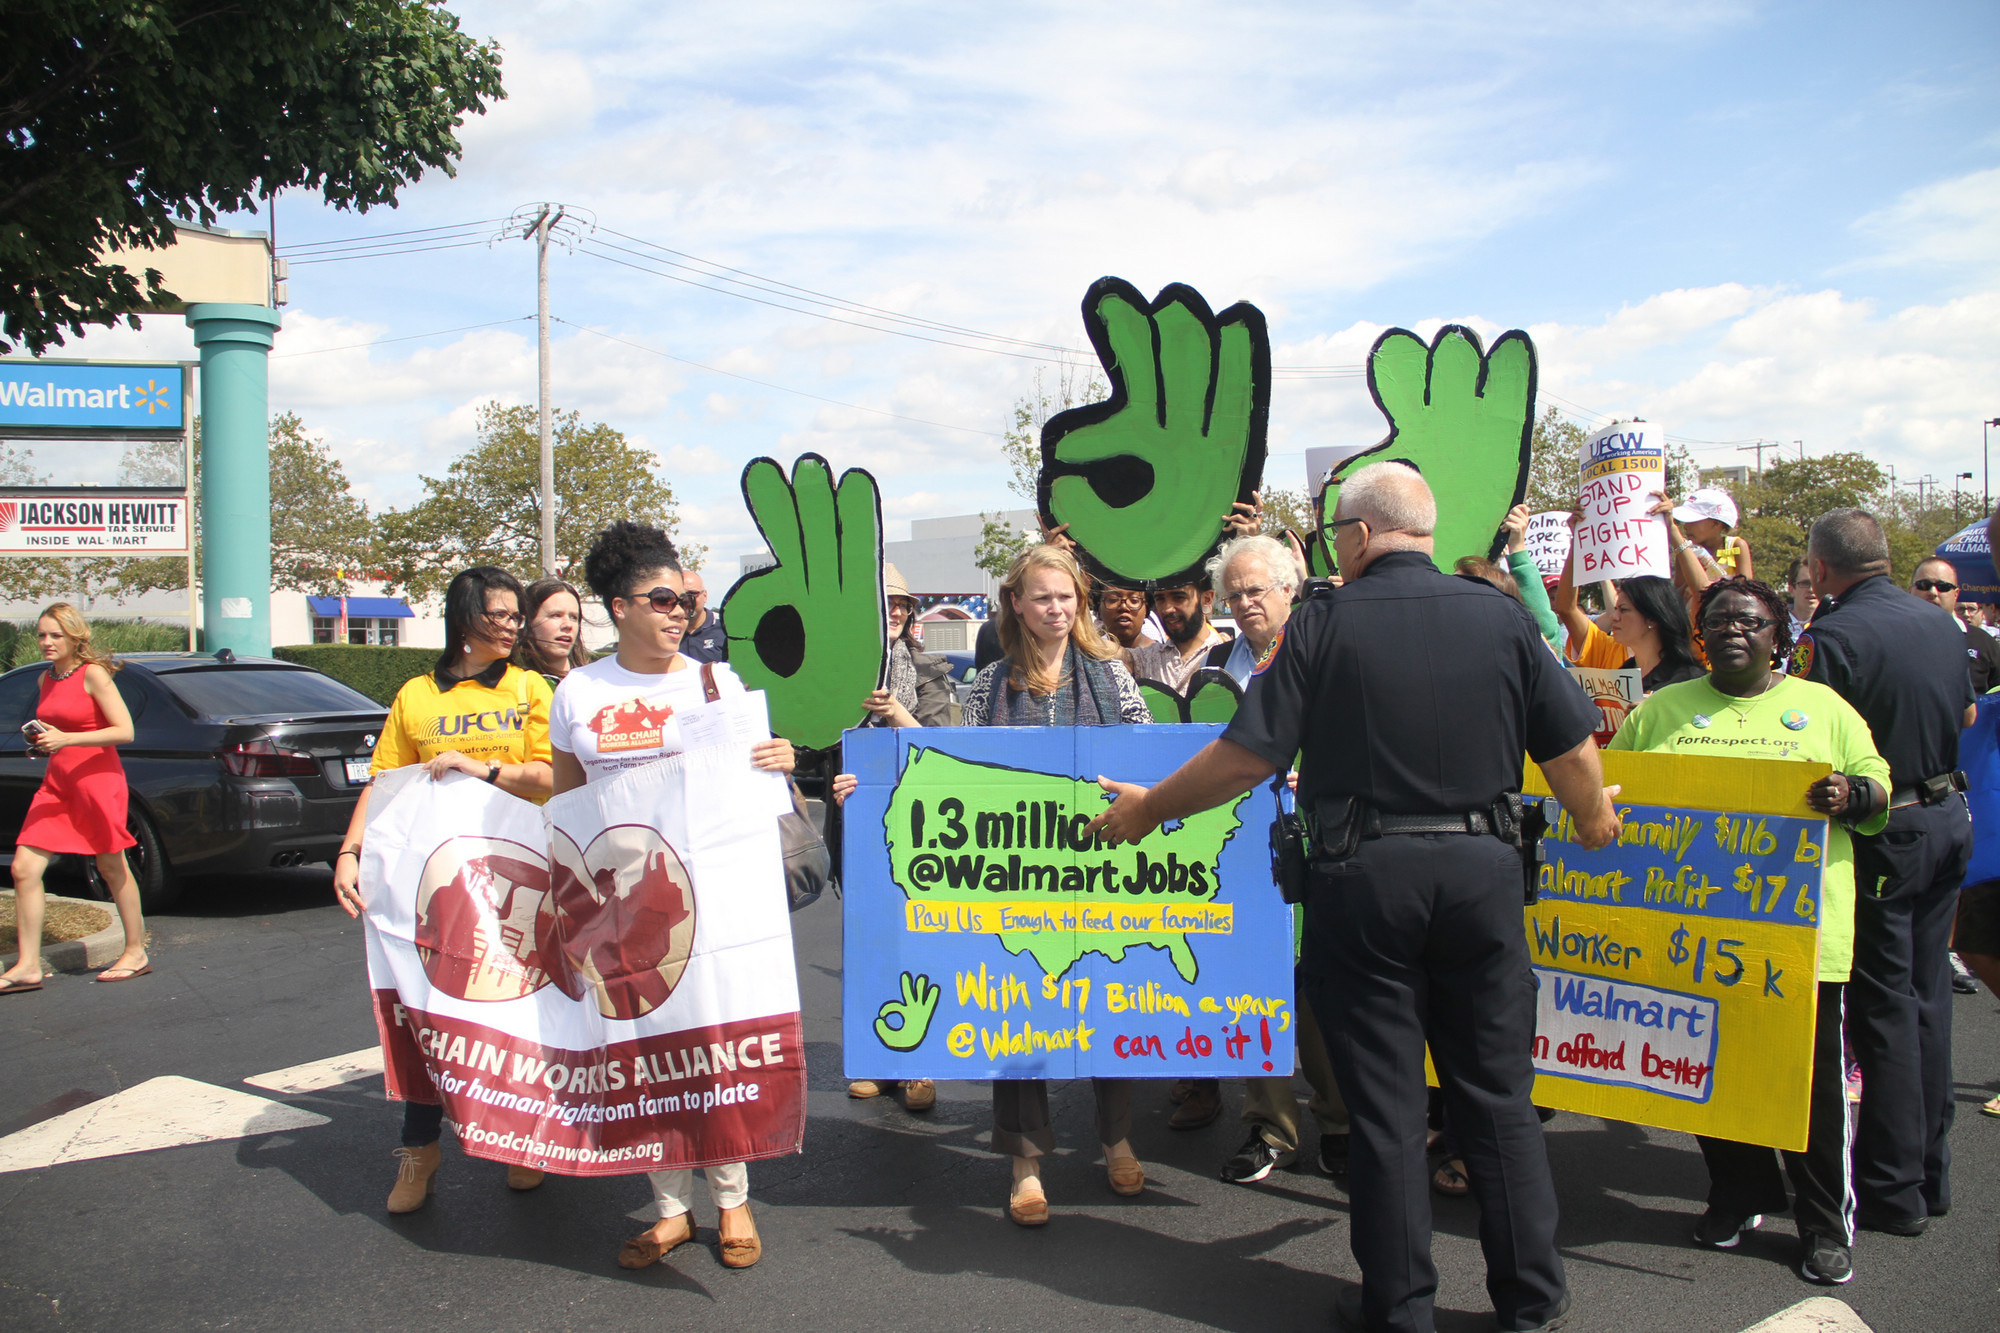 Nassau County Police prohibited the dozens of protestors from marching in front of the Valley Stream Walmart on Sept. 5.